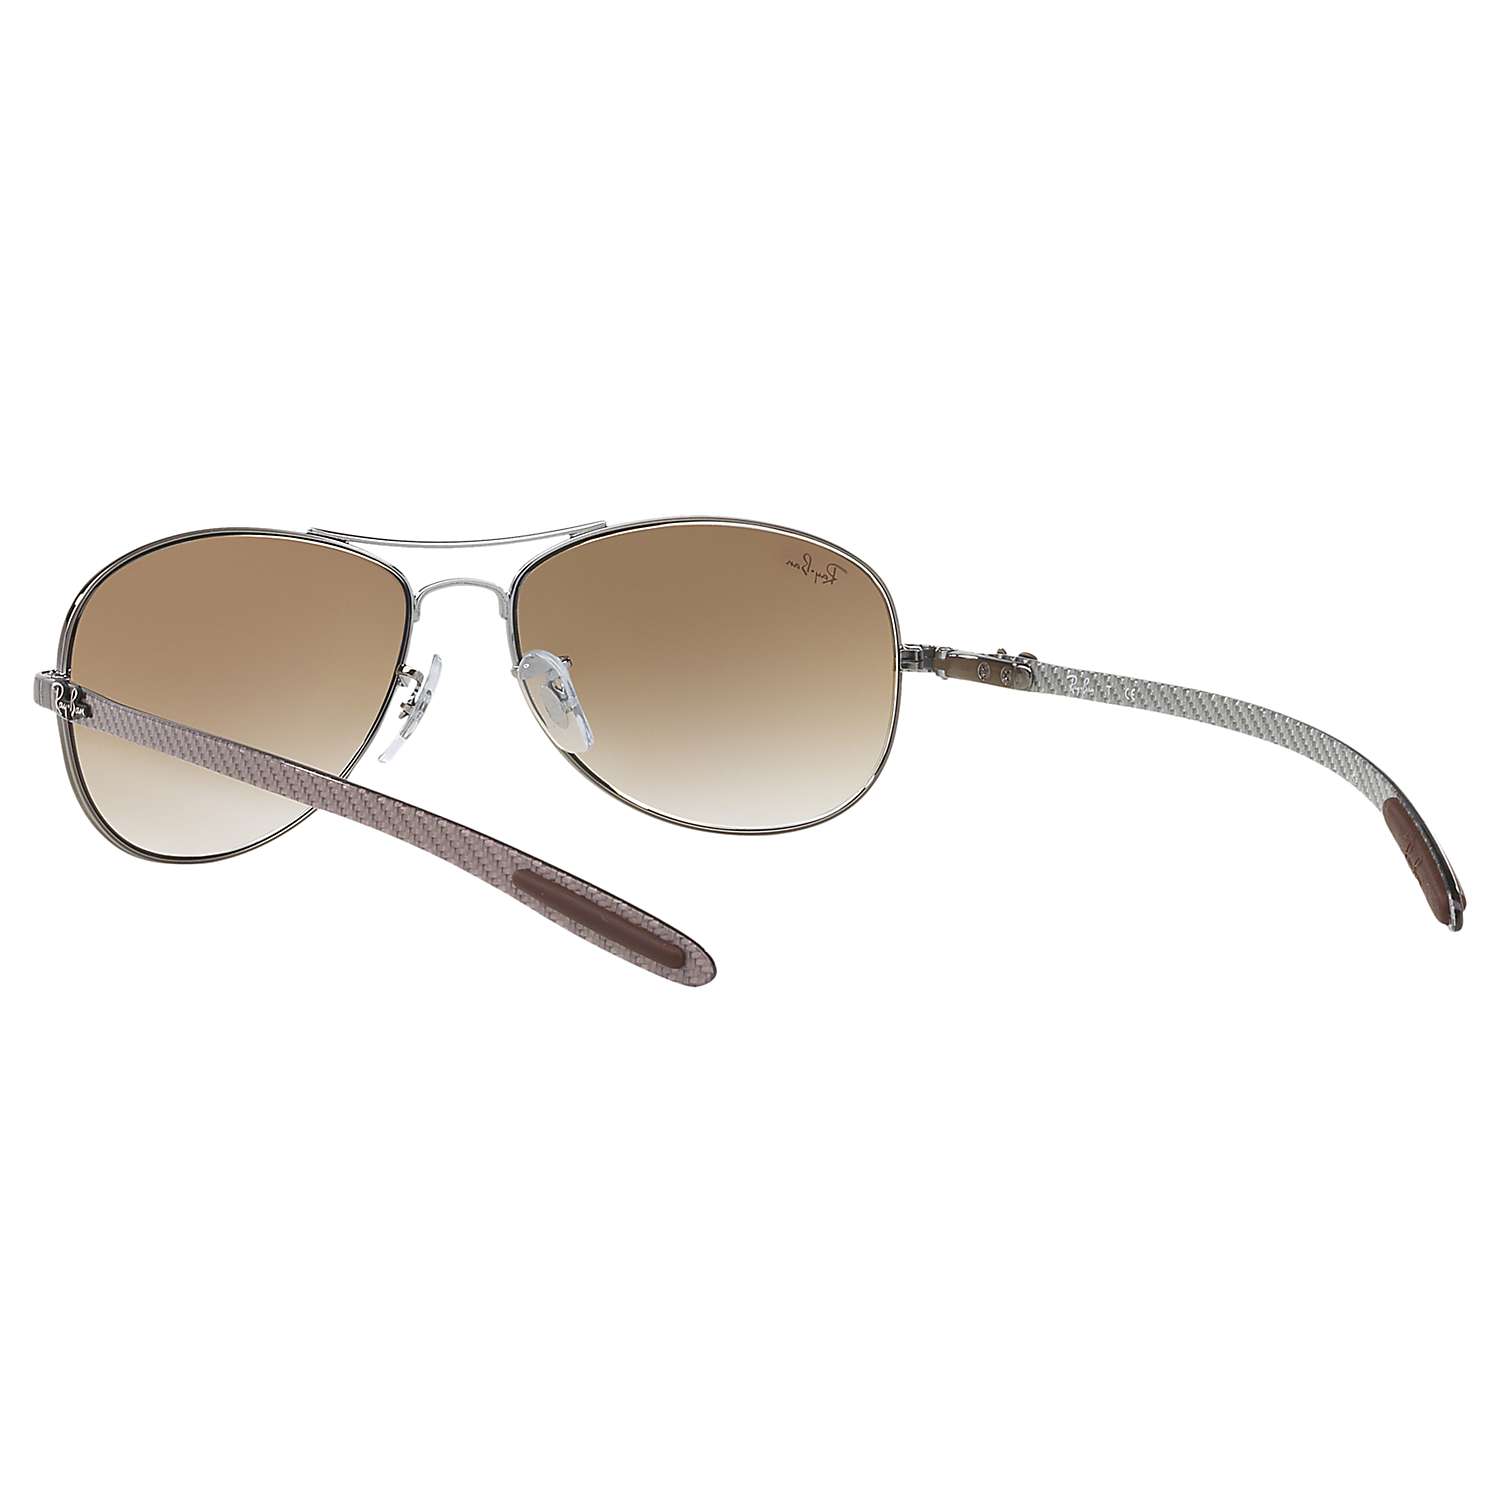 Buy Ray-Ban RB8301 Aviator Sunglasses, Silver/Brown Gradient Online at johnlewis.com